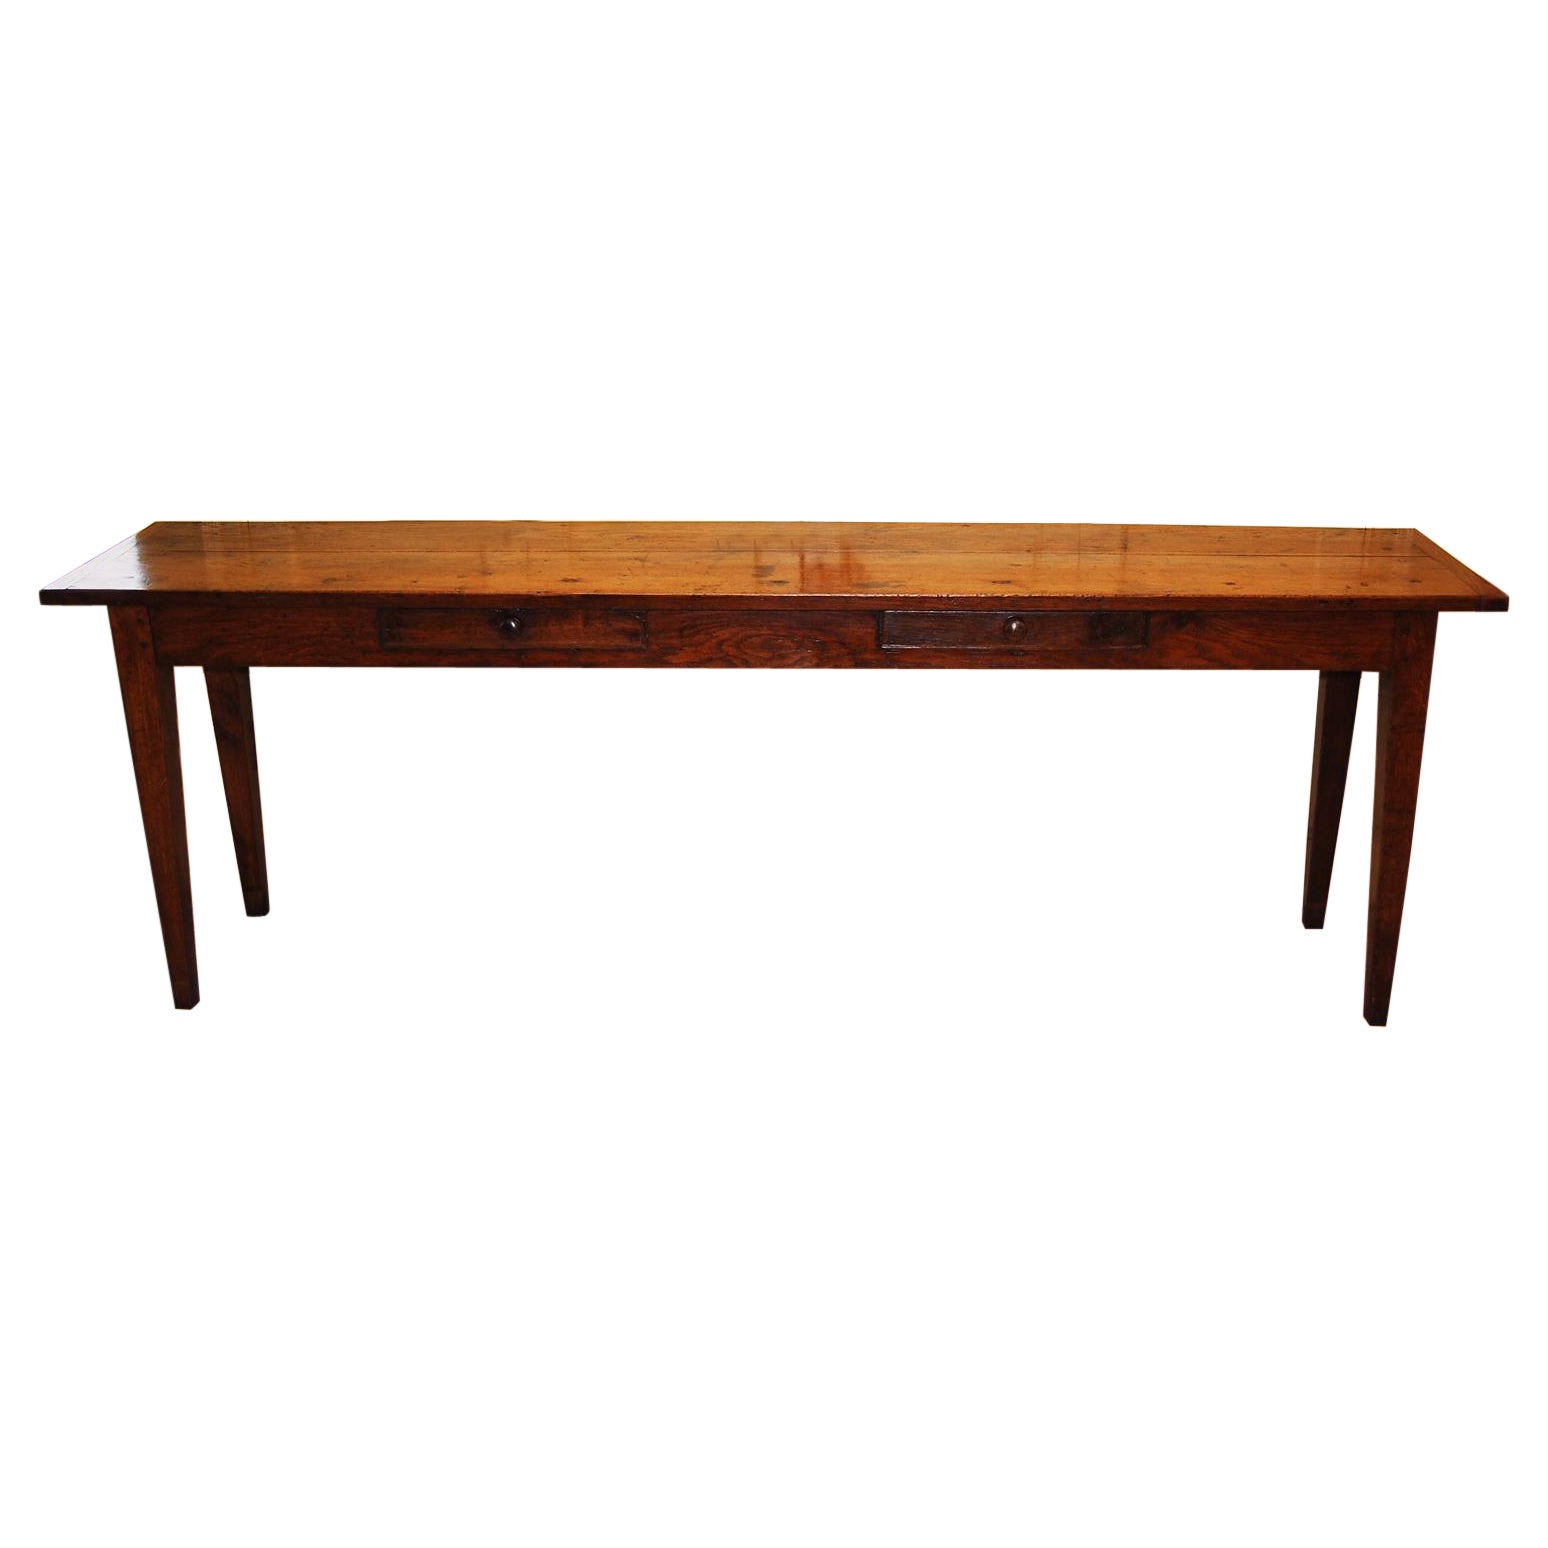 French Mid-19th Century Provincial Oak Serving Table Two Drawers